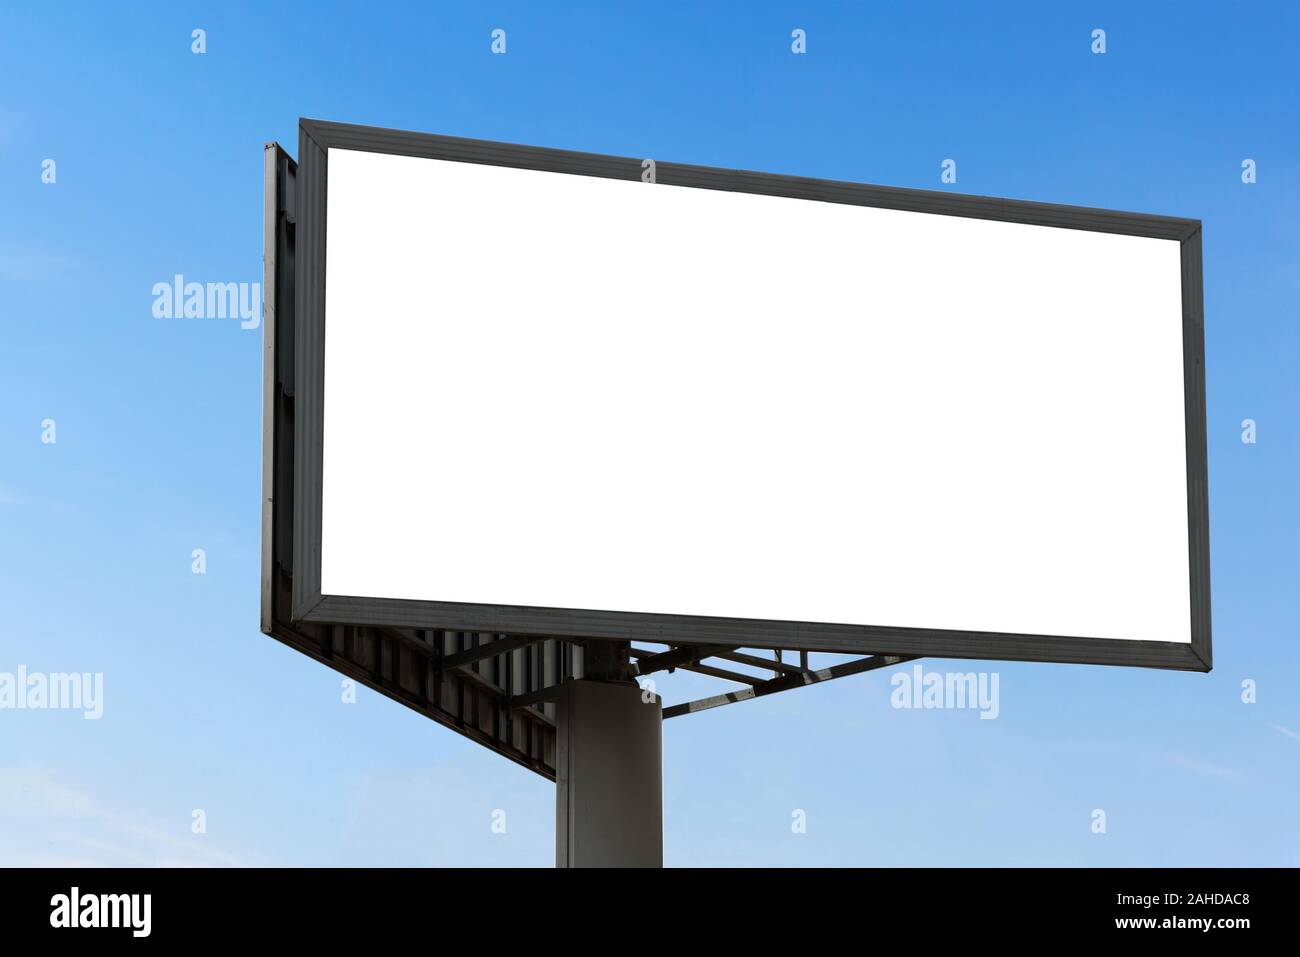 Template of a large blank advertising billboard on a clear blue sky background. Stock Photo